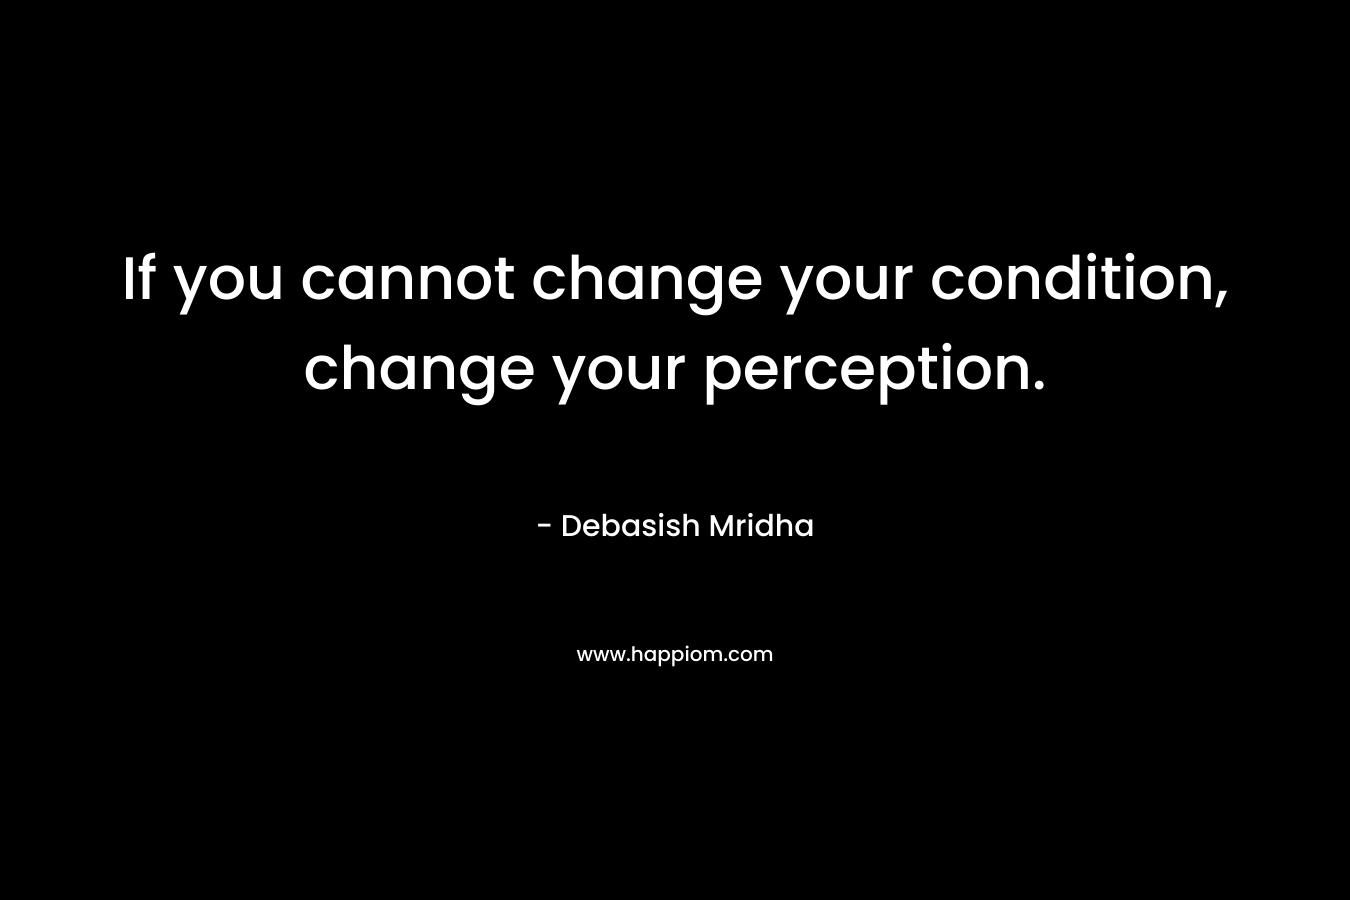 If you cannot change your condition, change your perception.